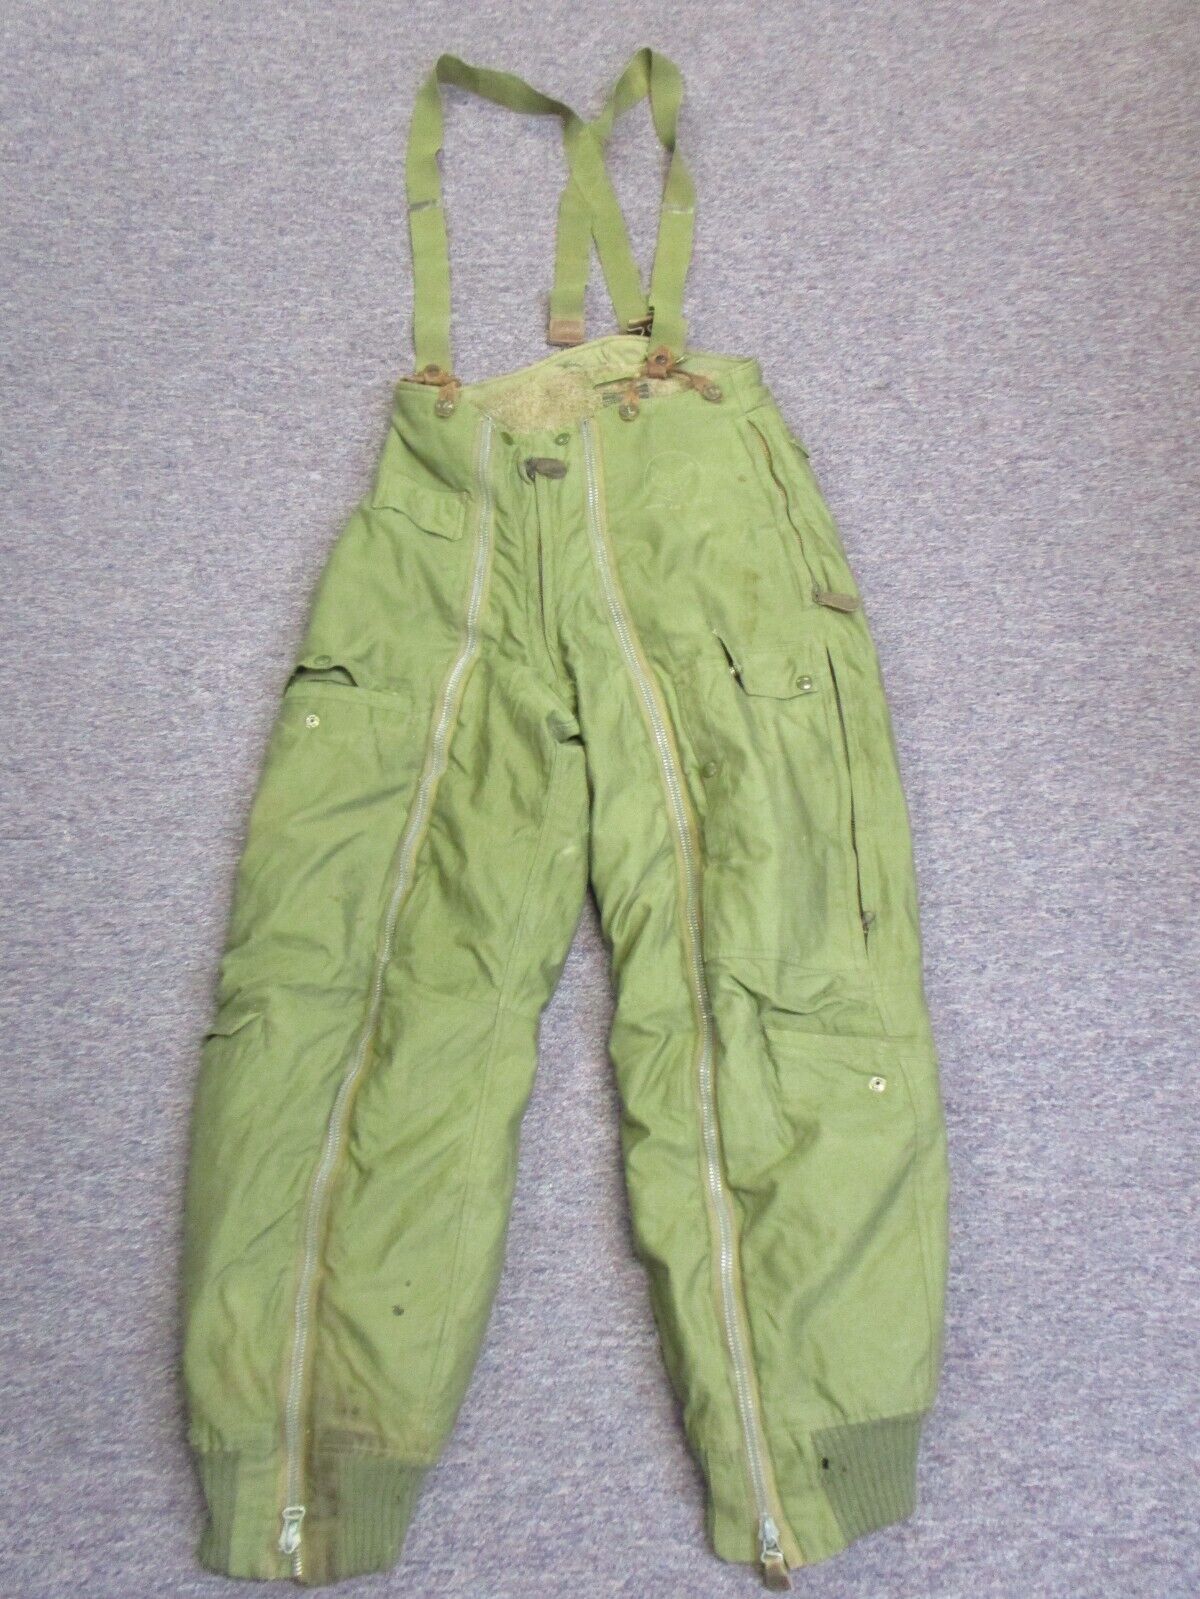 Vintage WWII US Army Air Force Type A-11 Flight Pants Alpaca Lined Size 30 1940s